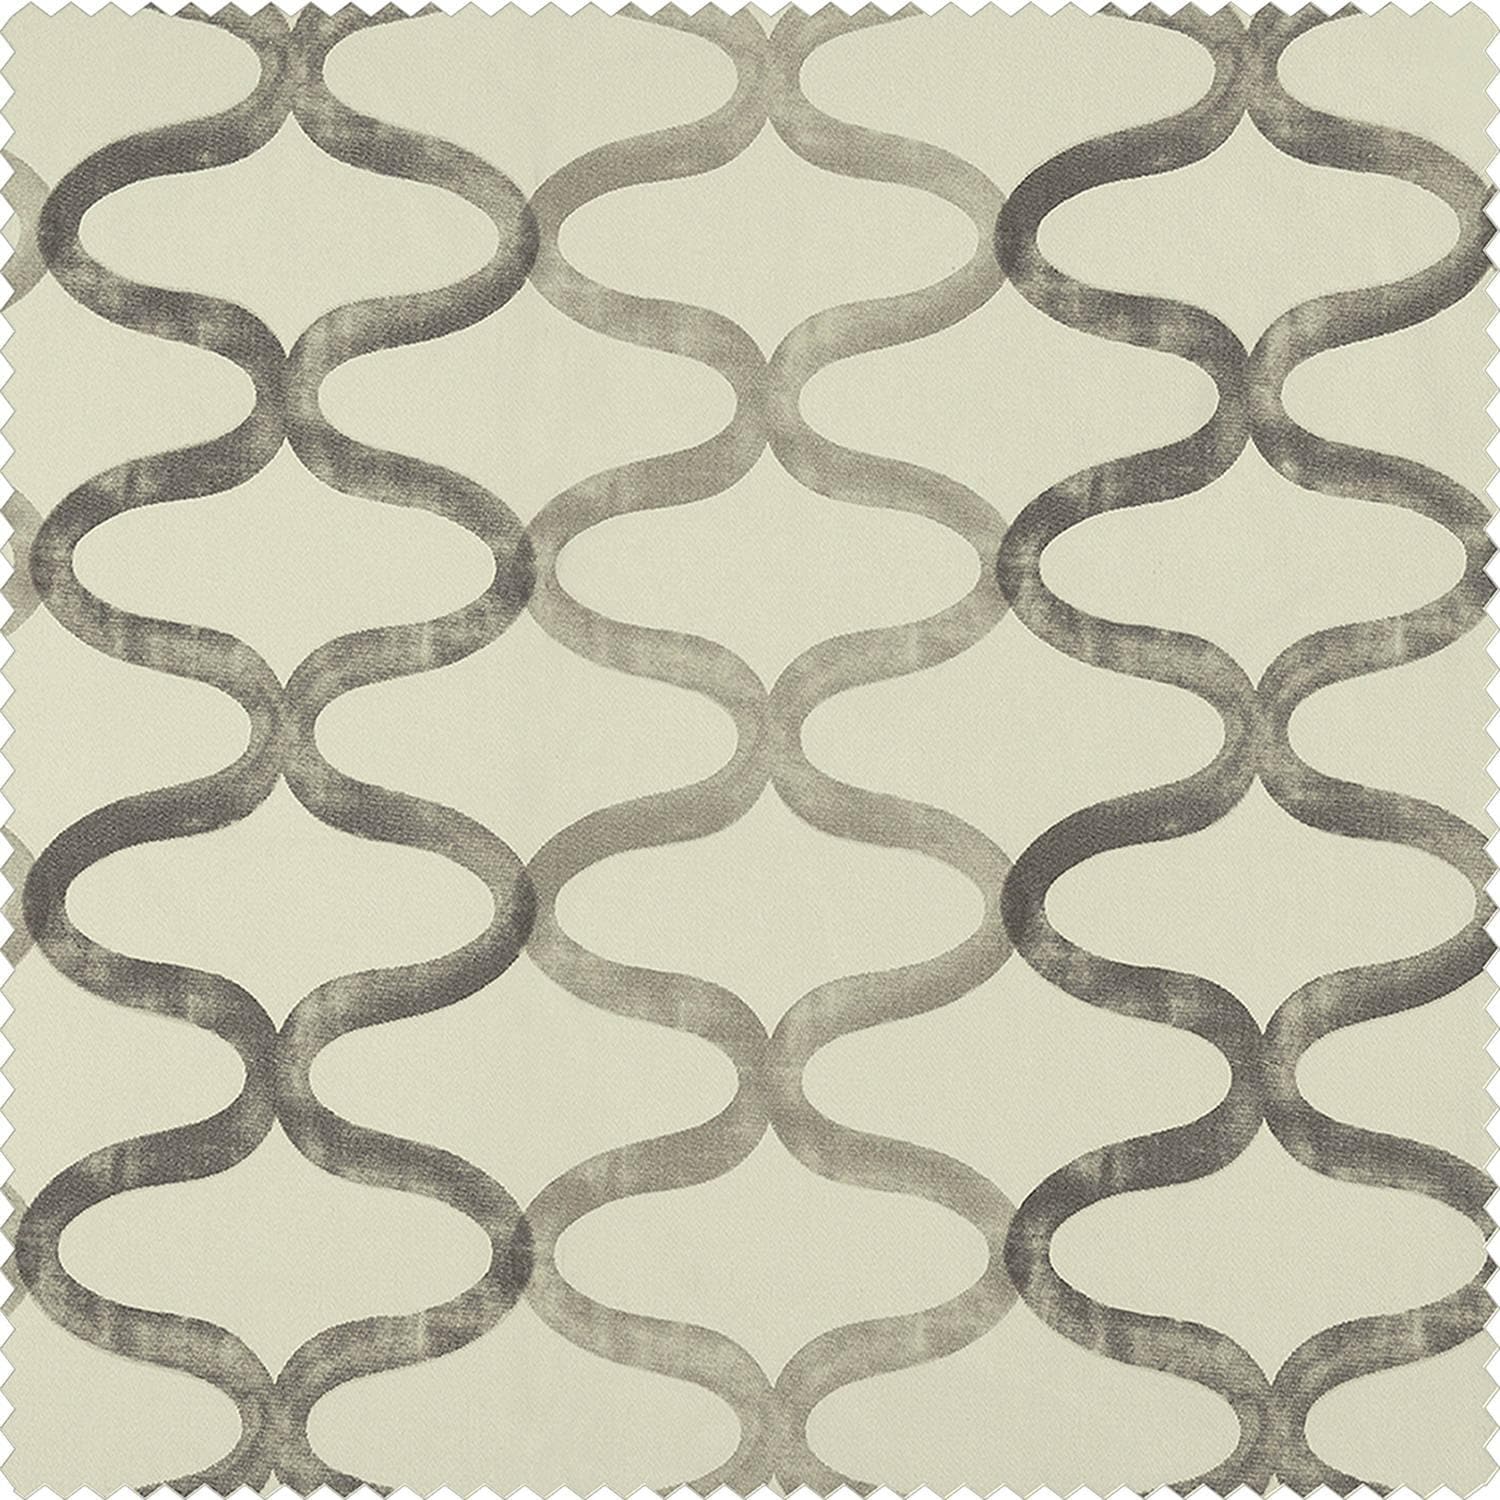 Illusions Silver Grey Printed Cotton Swatch